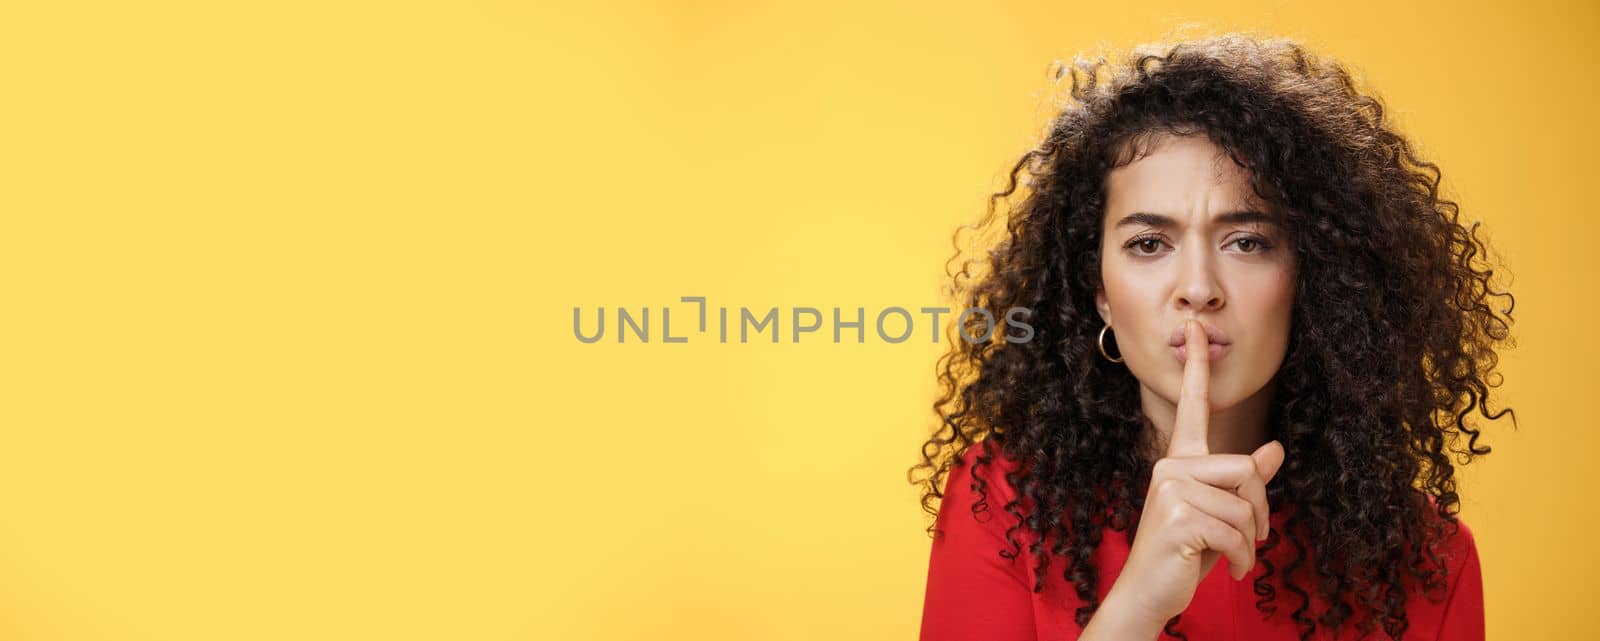 Shh not say word. Portrait of serious-looking sexy young woman with curly hair showing shush gesture with index finger over folded lips frowning asking keep secret promise keep silent over yellow wall by Benzoix